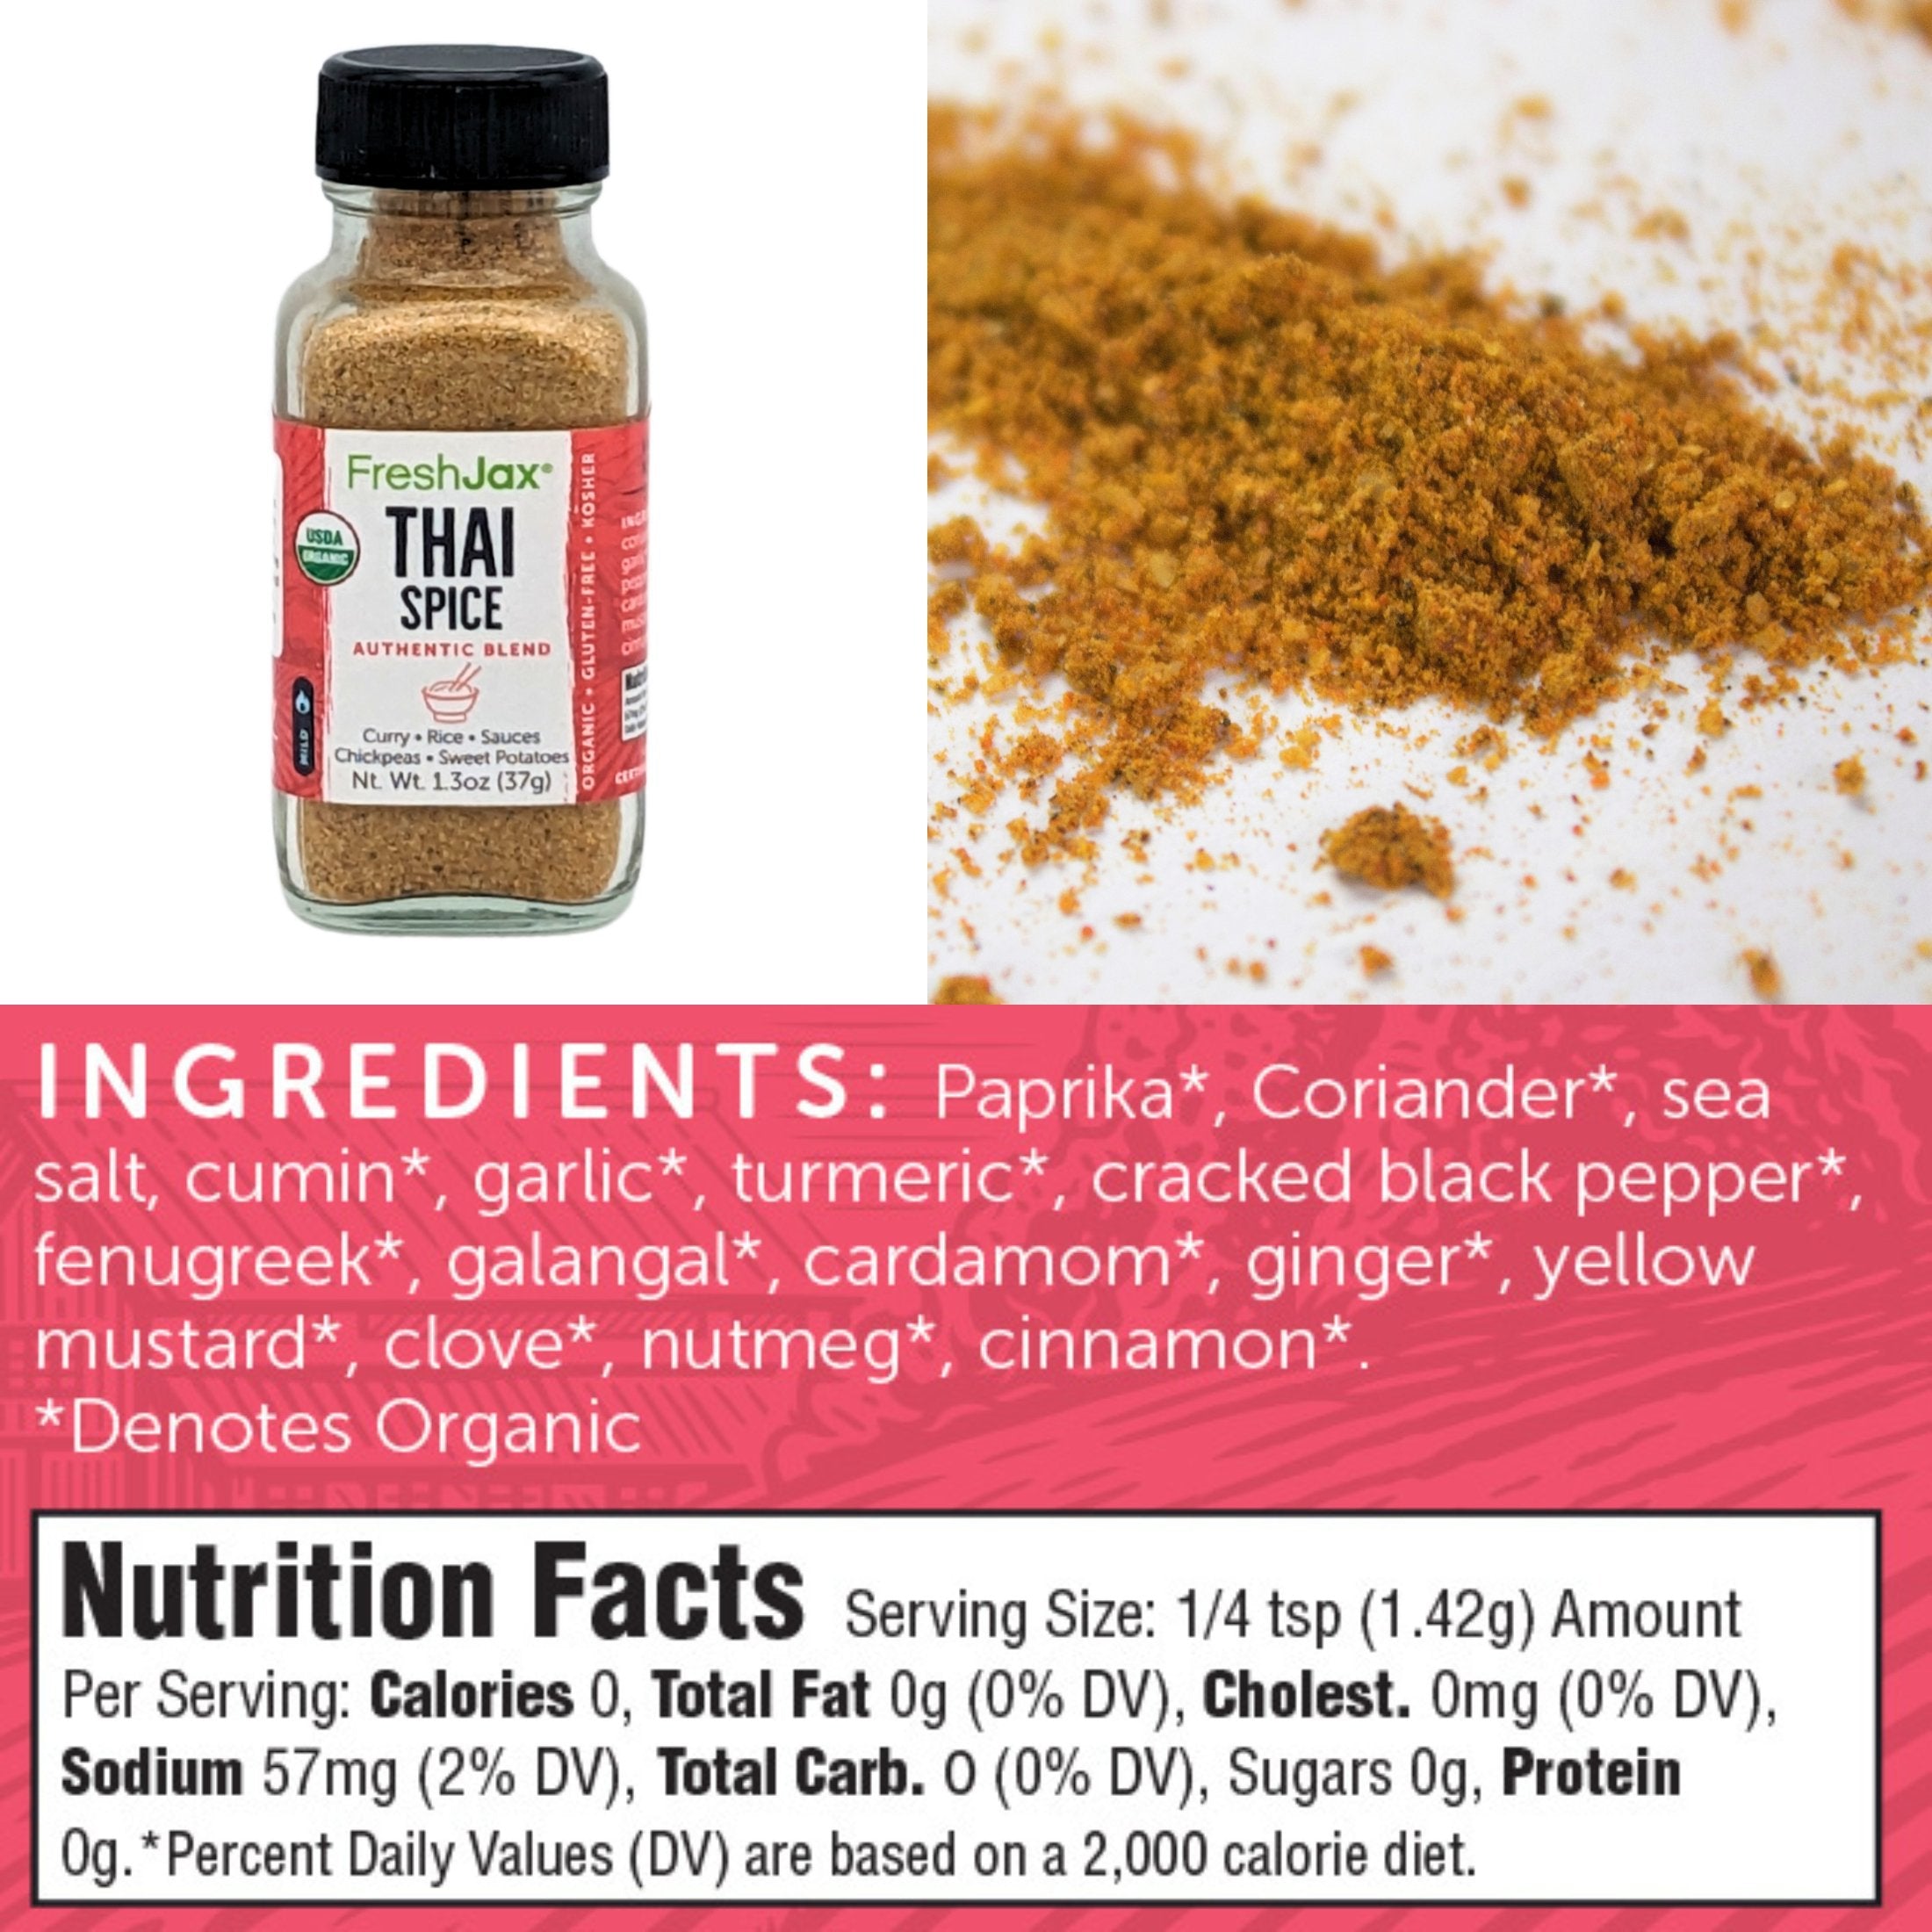 FreshJax Organic Spices Thai Spice Seasoning Blend Ingredients and Nutritional Information